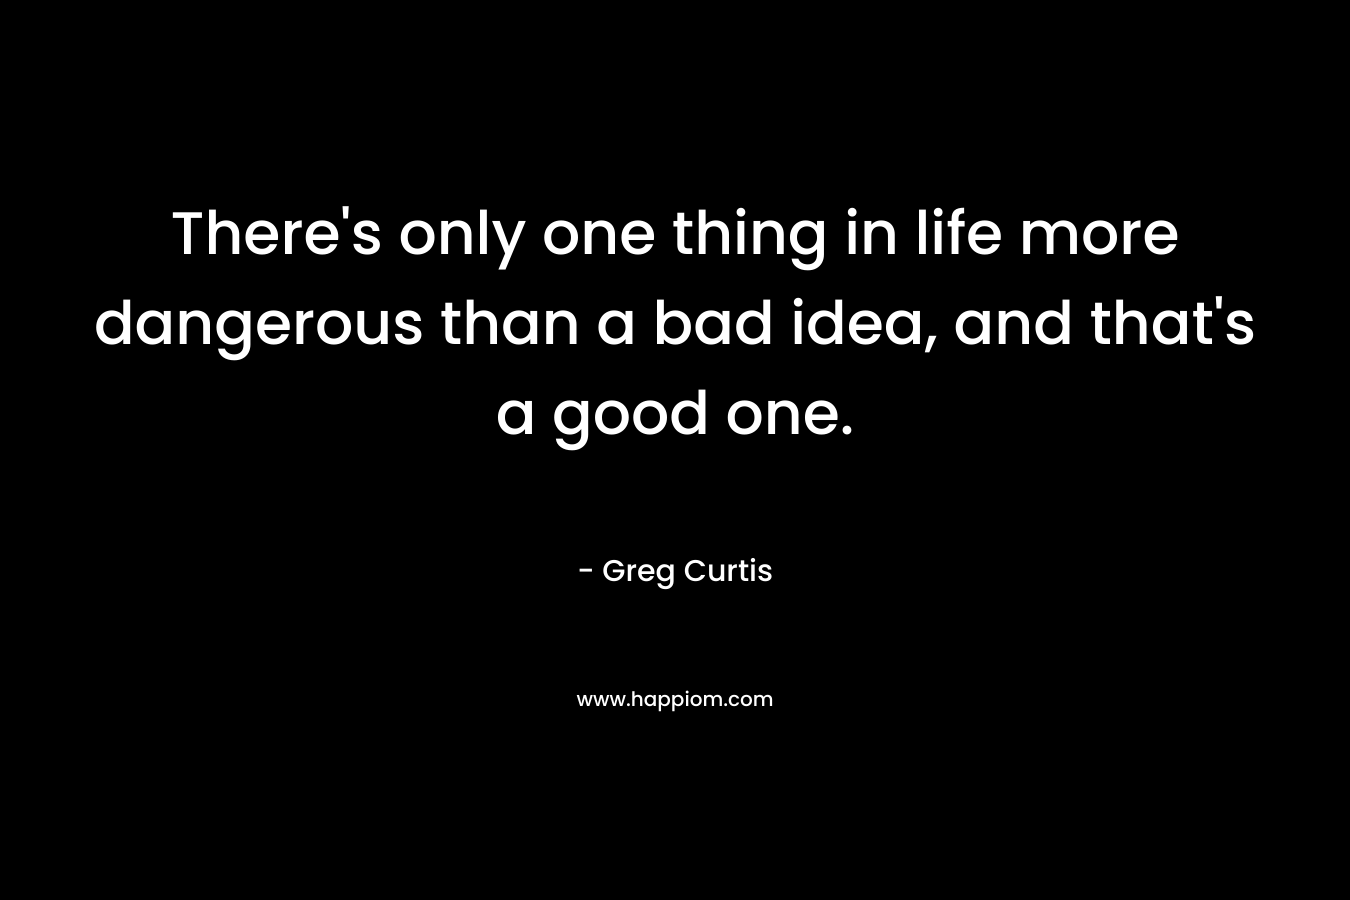 There's only one thing in life more dangerous than a bad idea, and that's a good one.